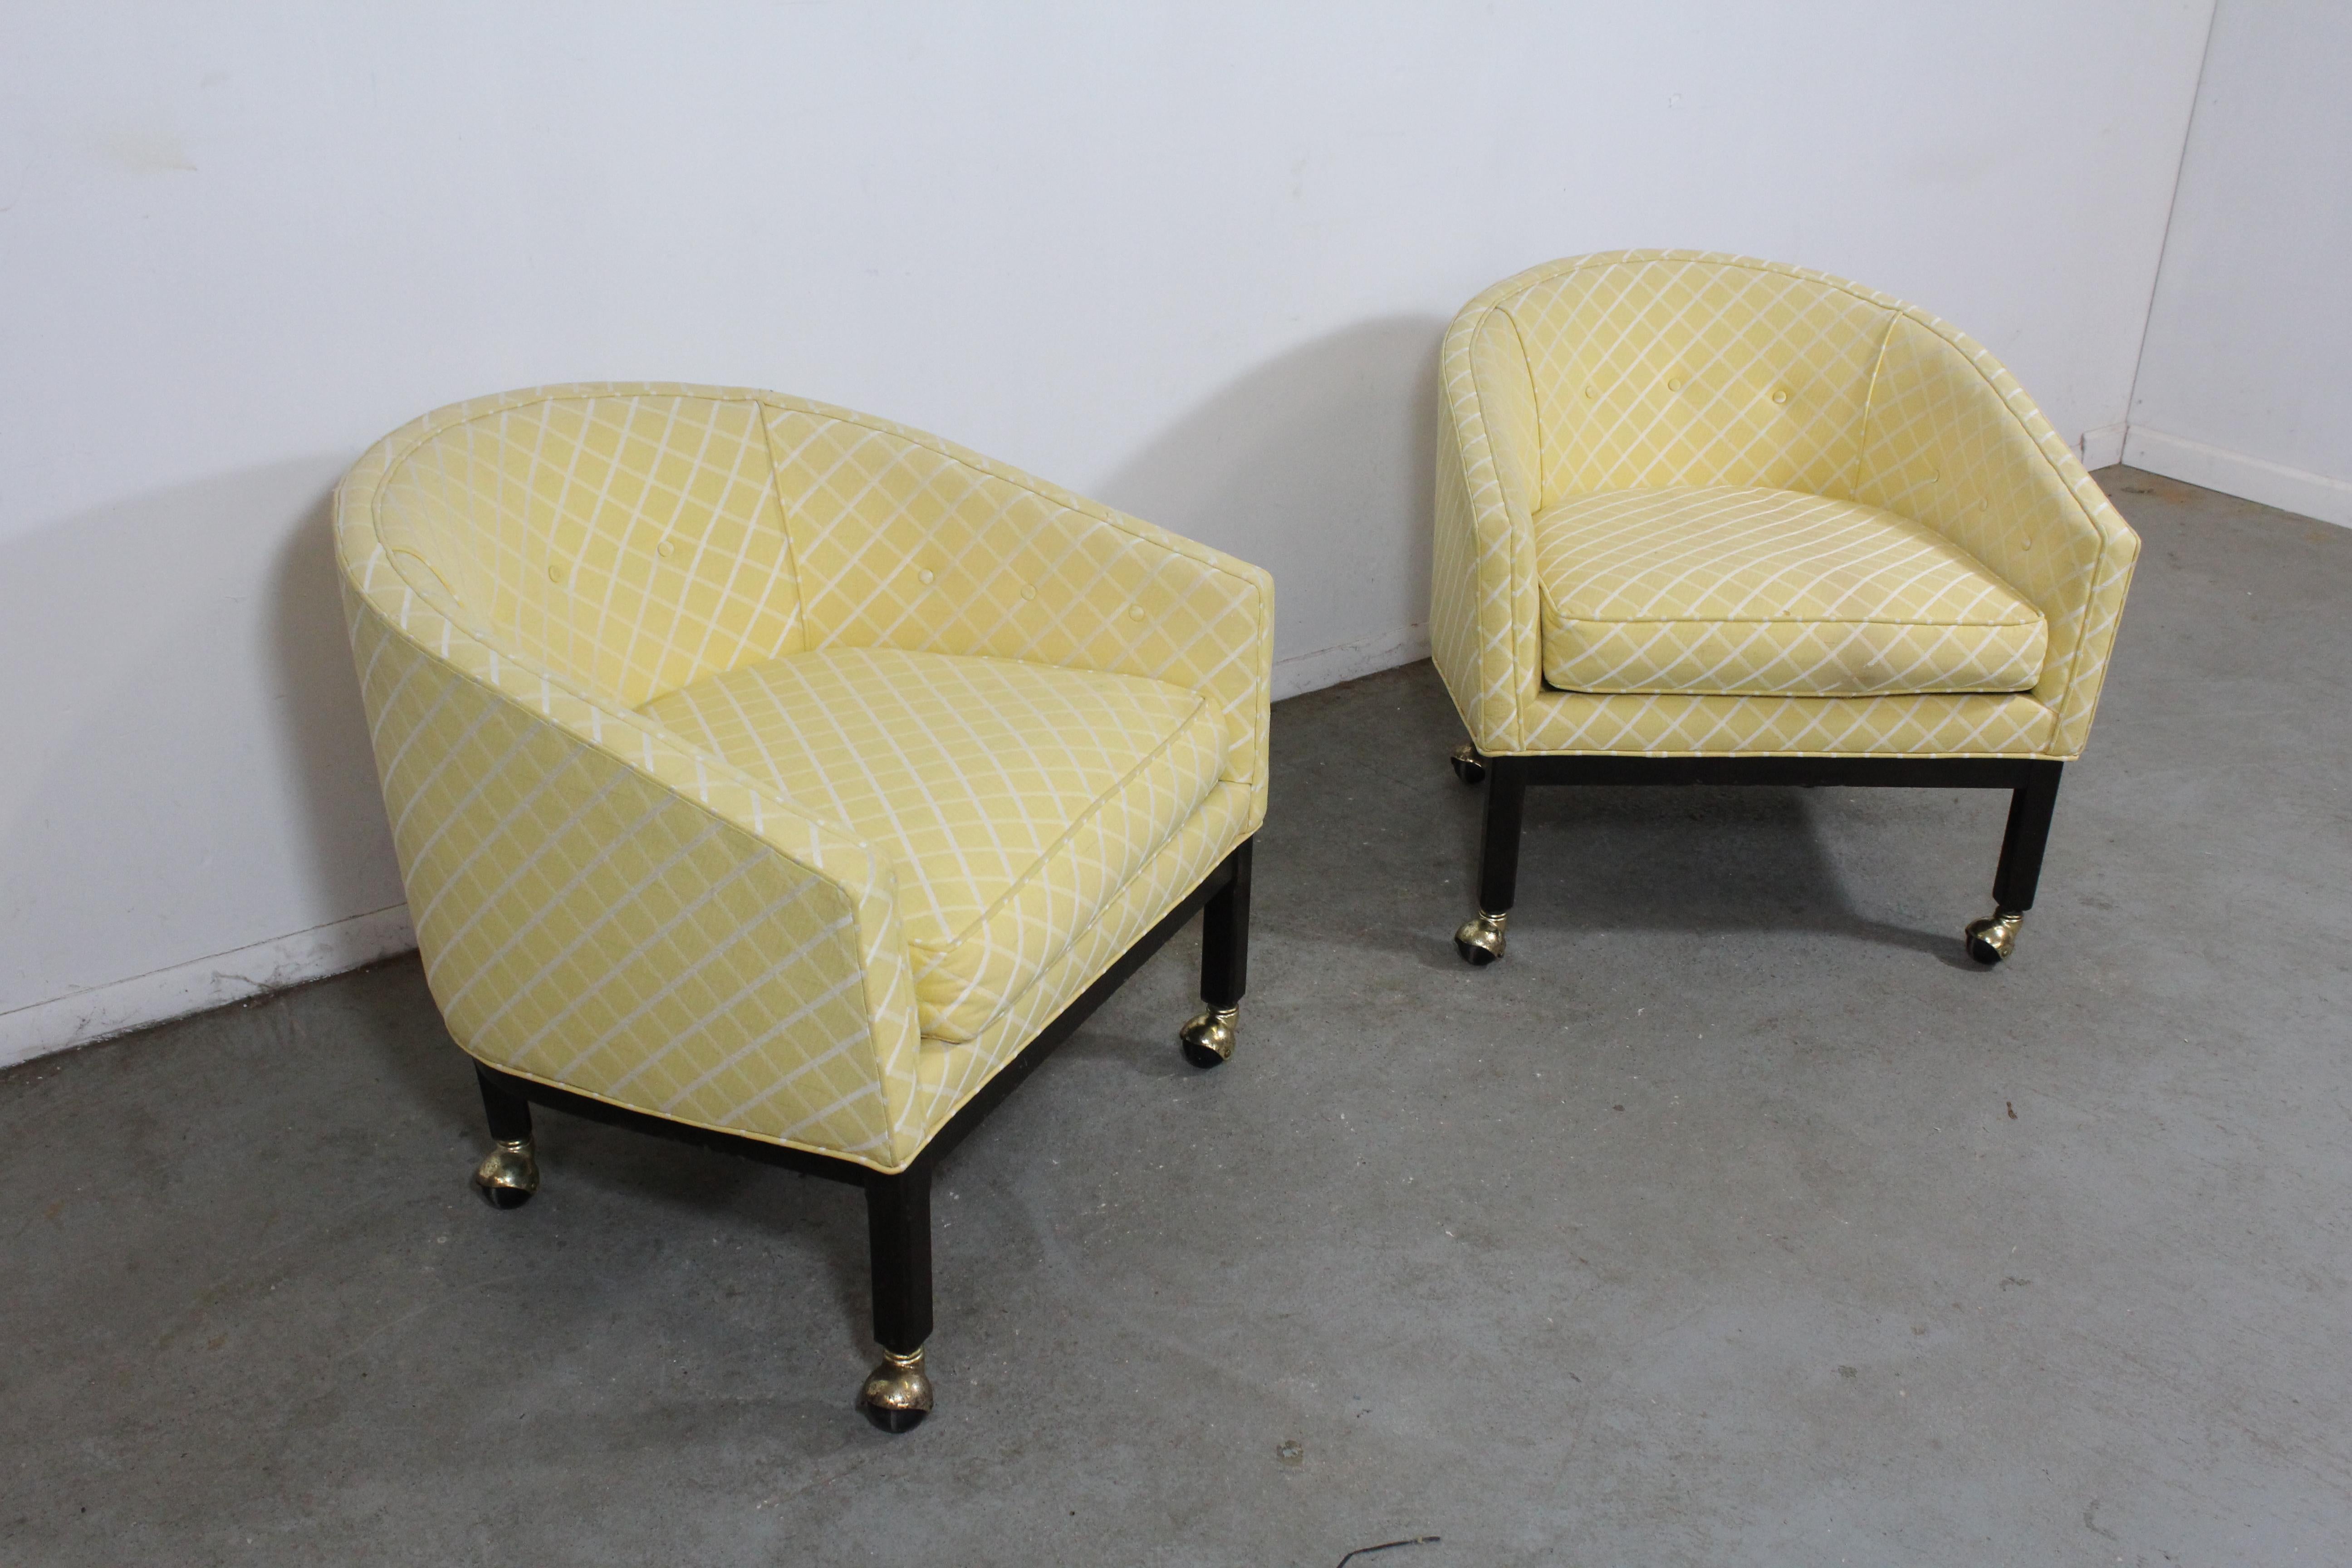 American Pair of Mid-Century Modern Barrel Back Lounge Chairs -Directional